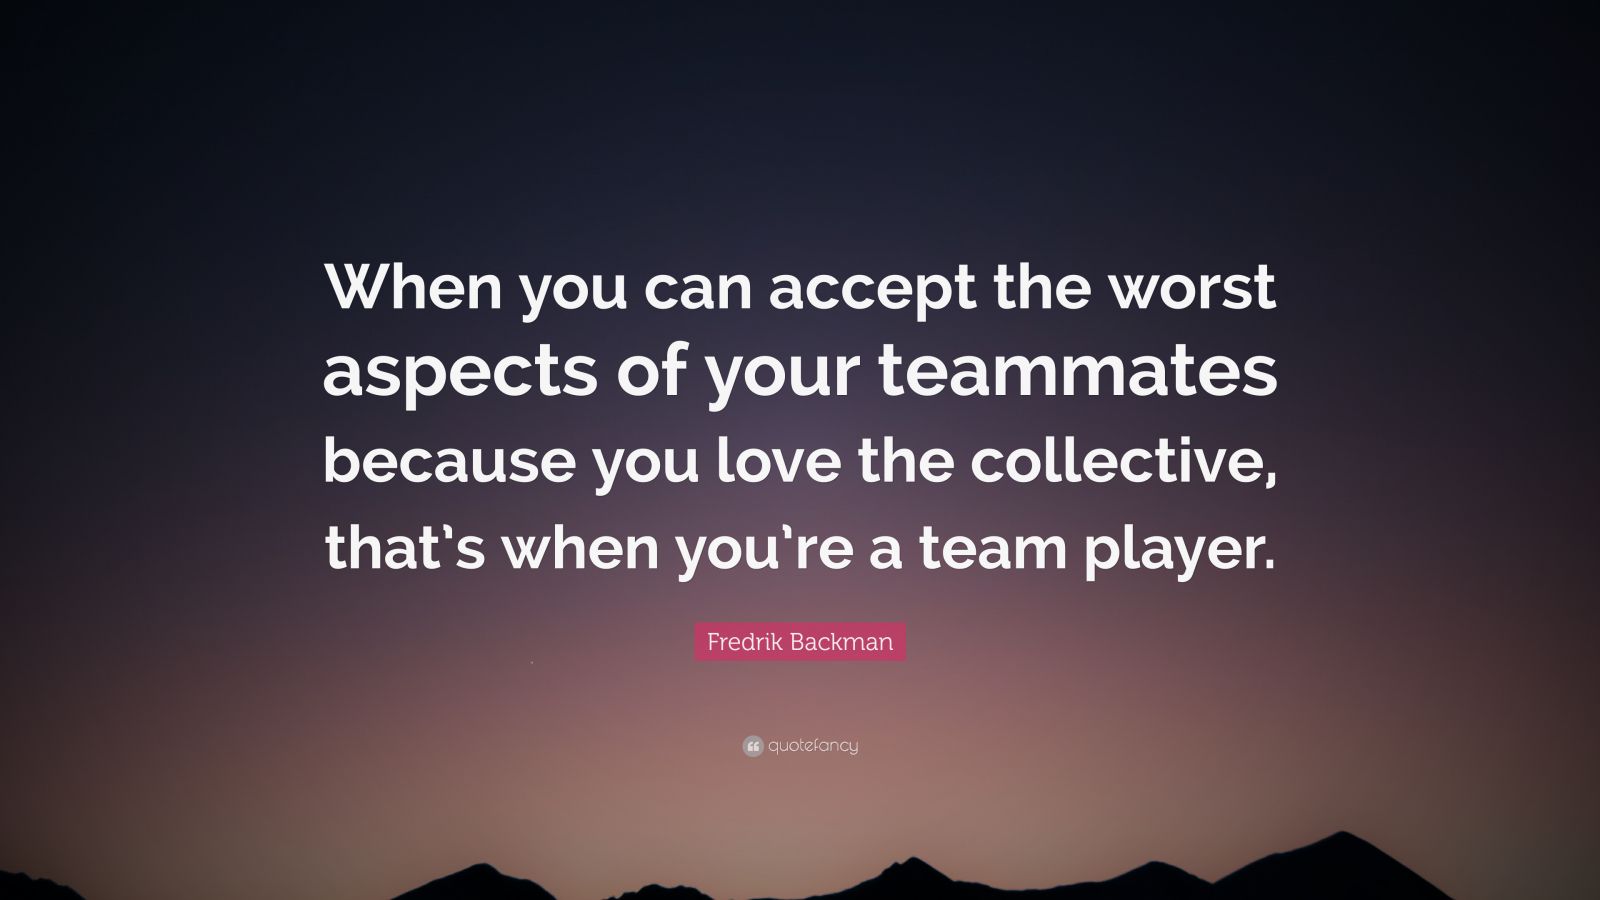 Fredrik Backman Quote: “When you can accept the worst aspects of your ...